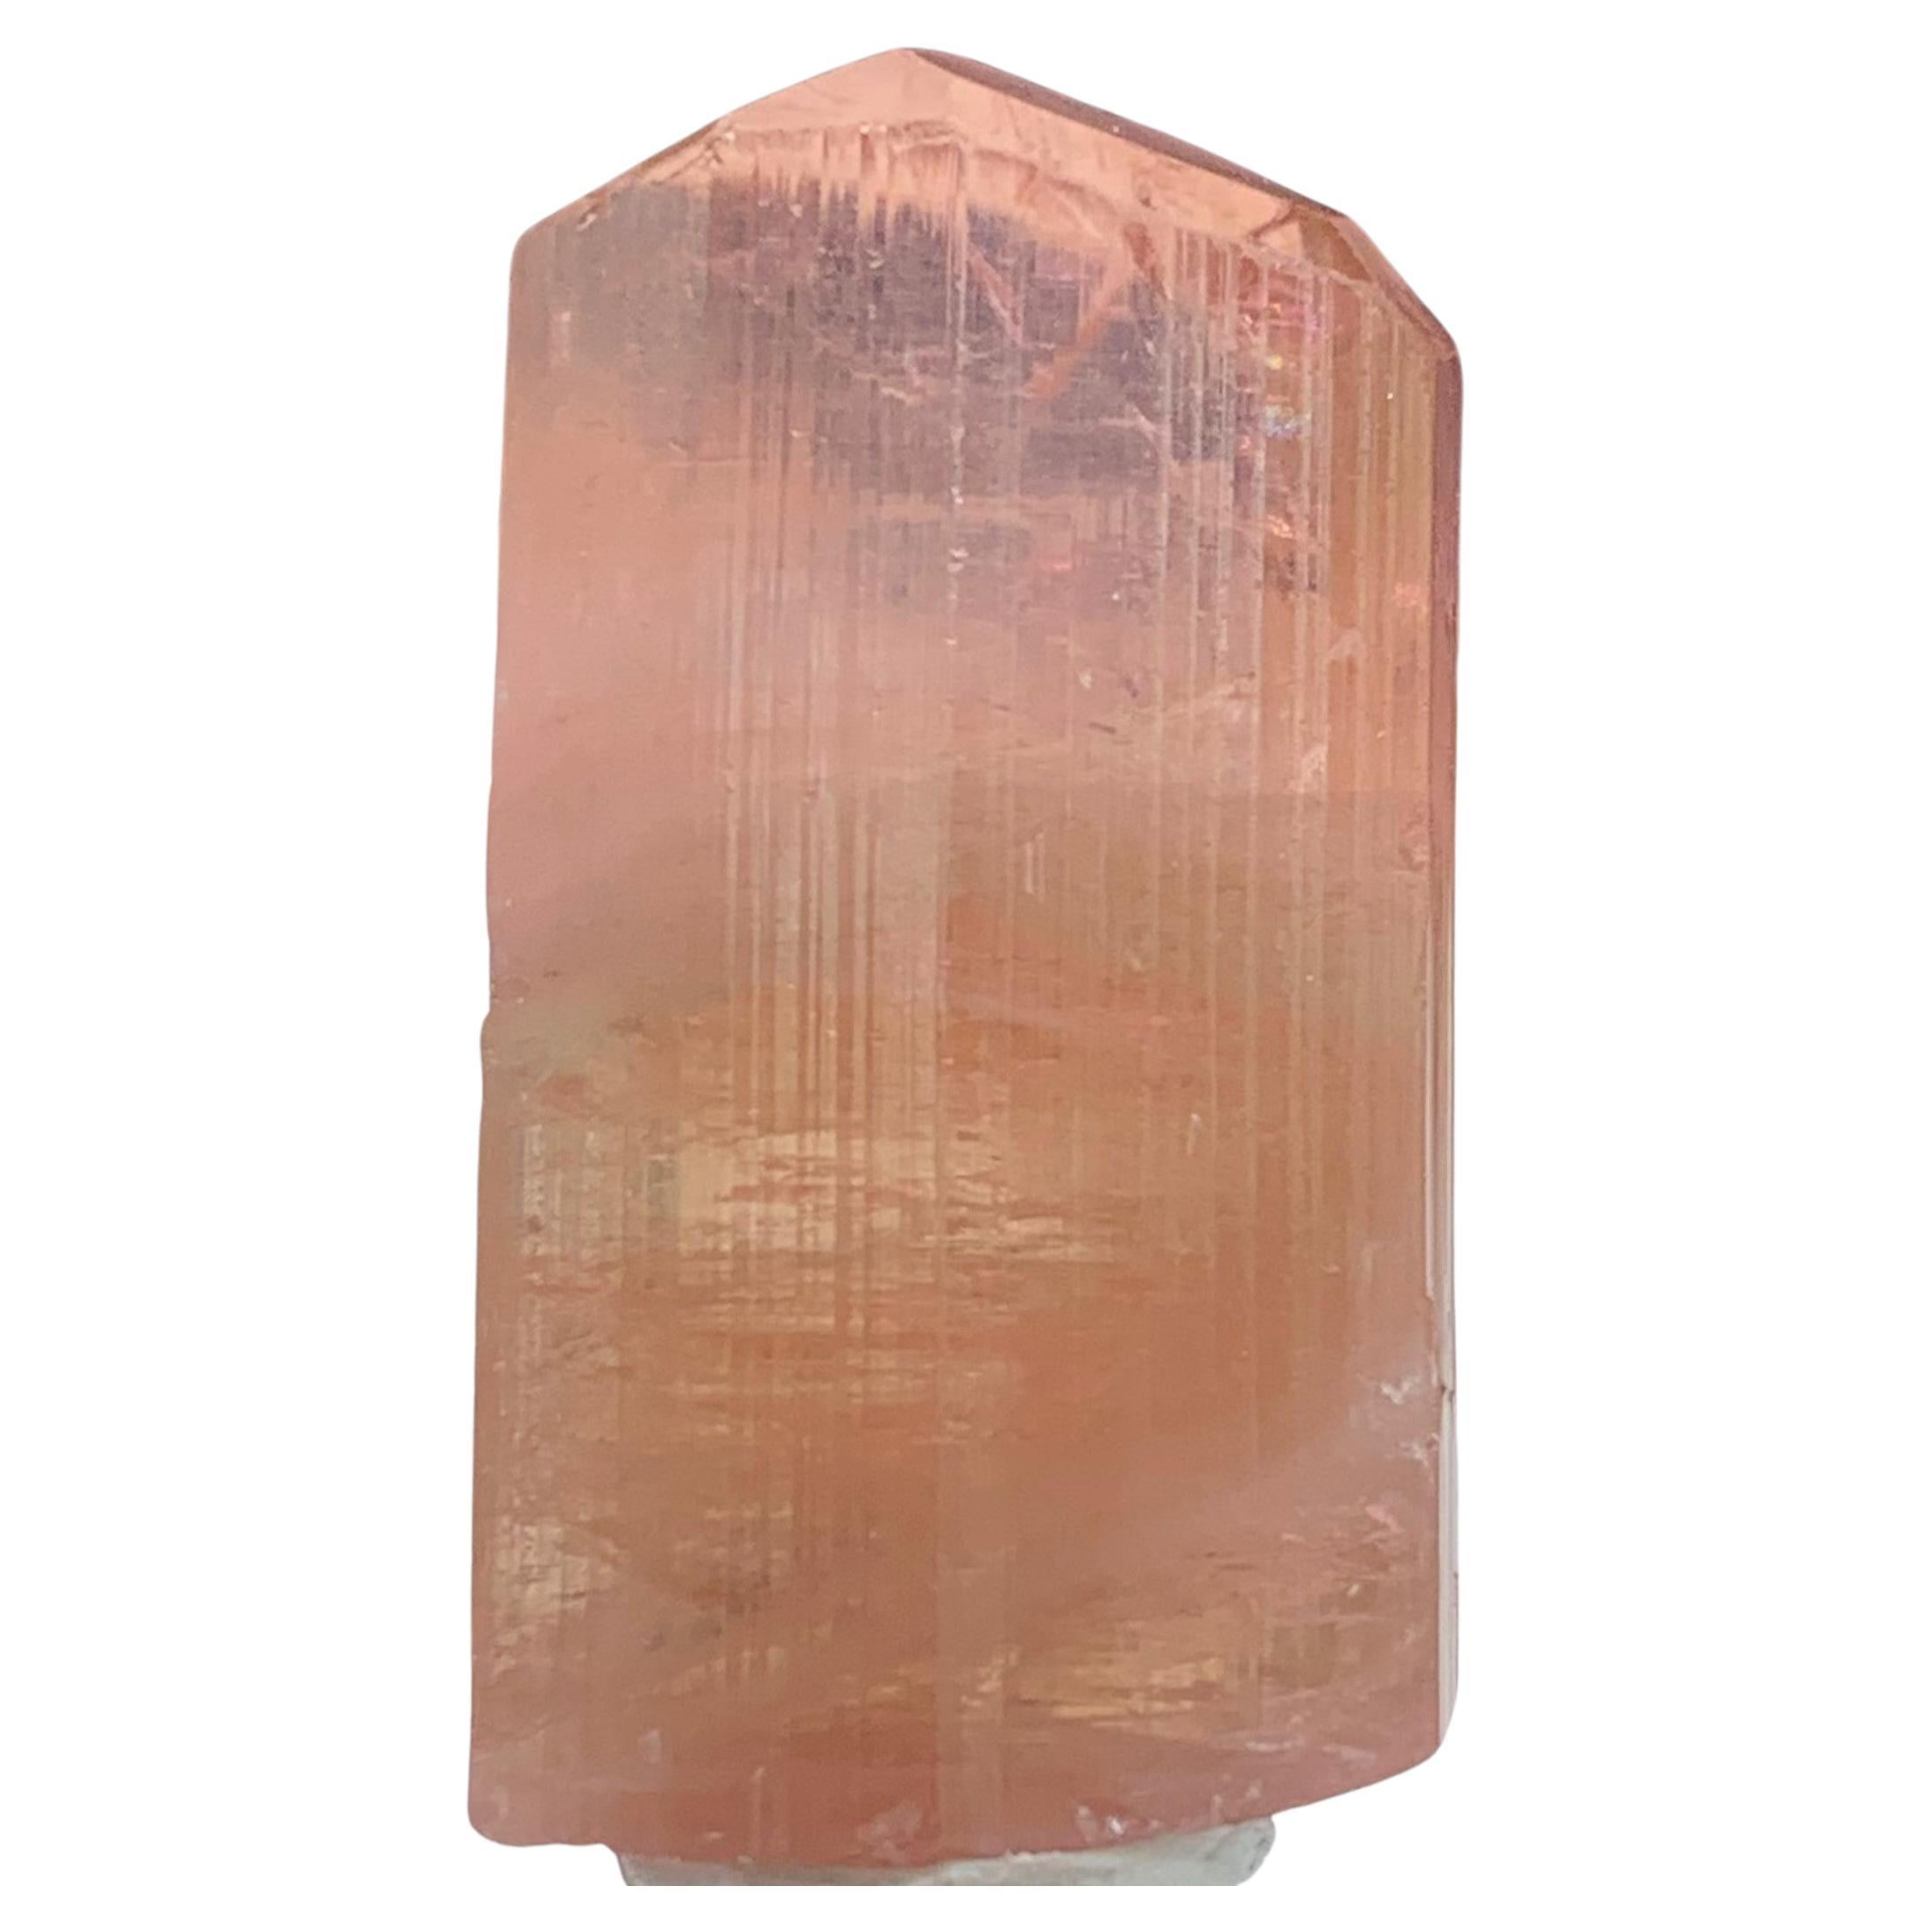 50.00 Carat Amazing Peach Color Terminated Tourmaline Crystal From Afghanistan